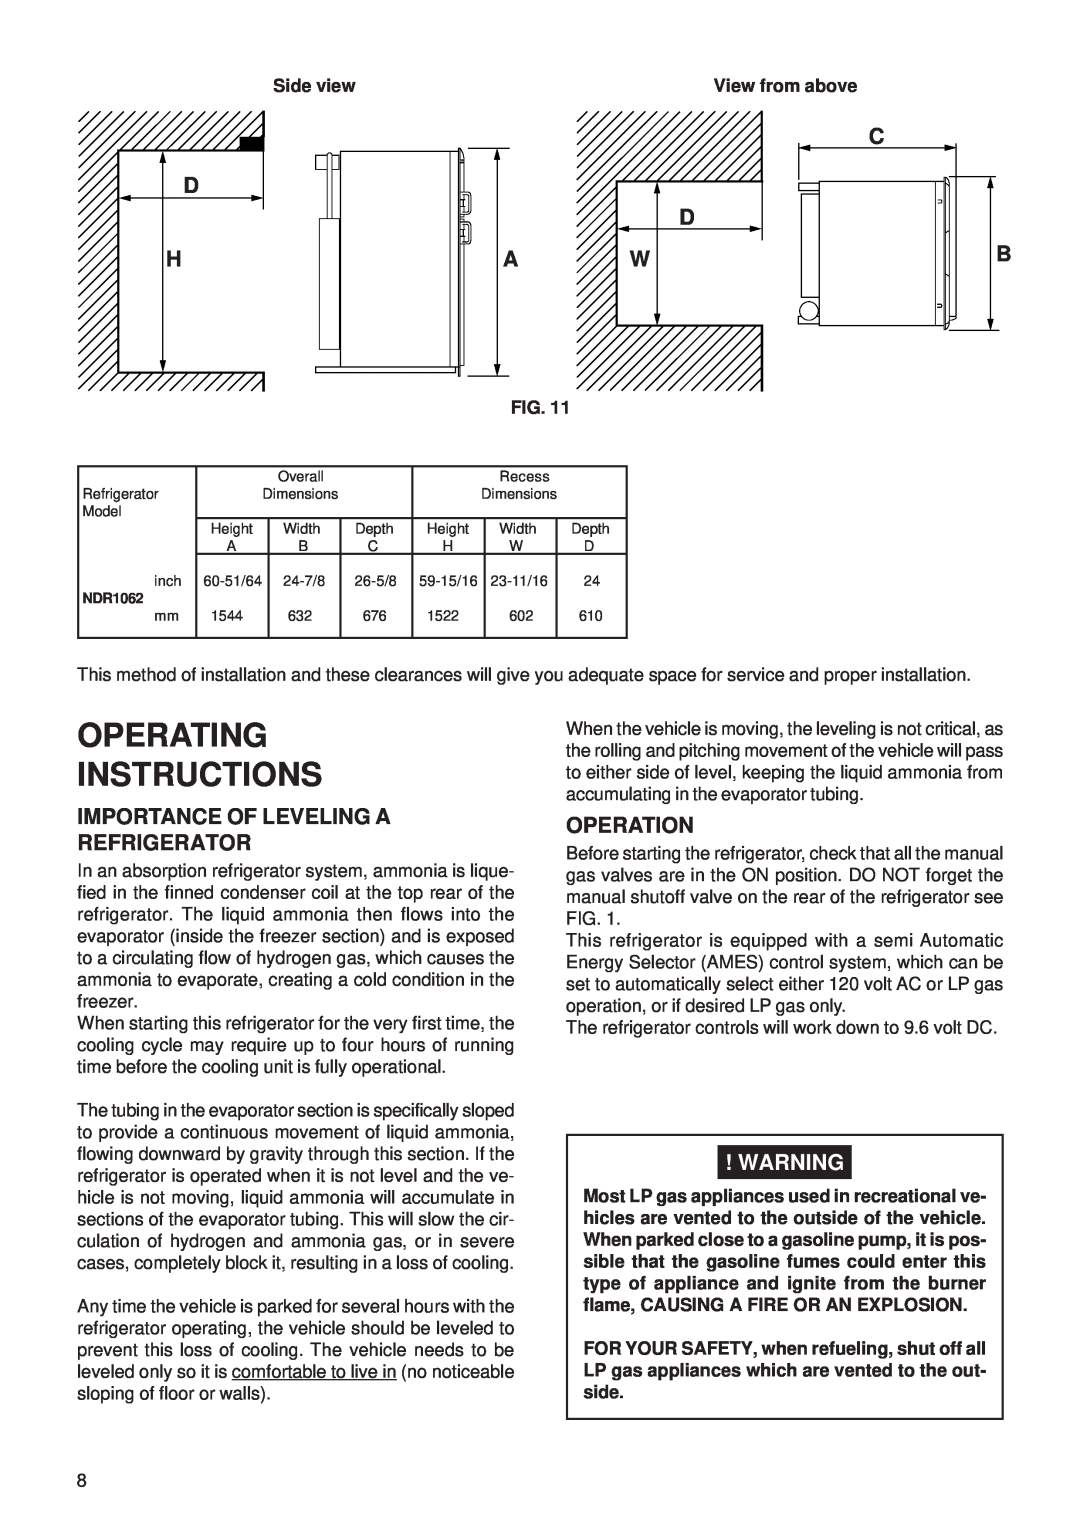 Dometic NDR1062 manual Operating Instructions, C D Aw, Importance Of Leveling A Refrigerator, Operation, Side view 